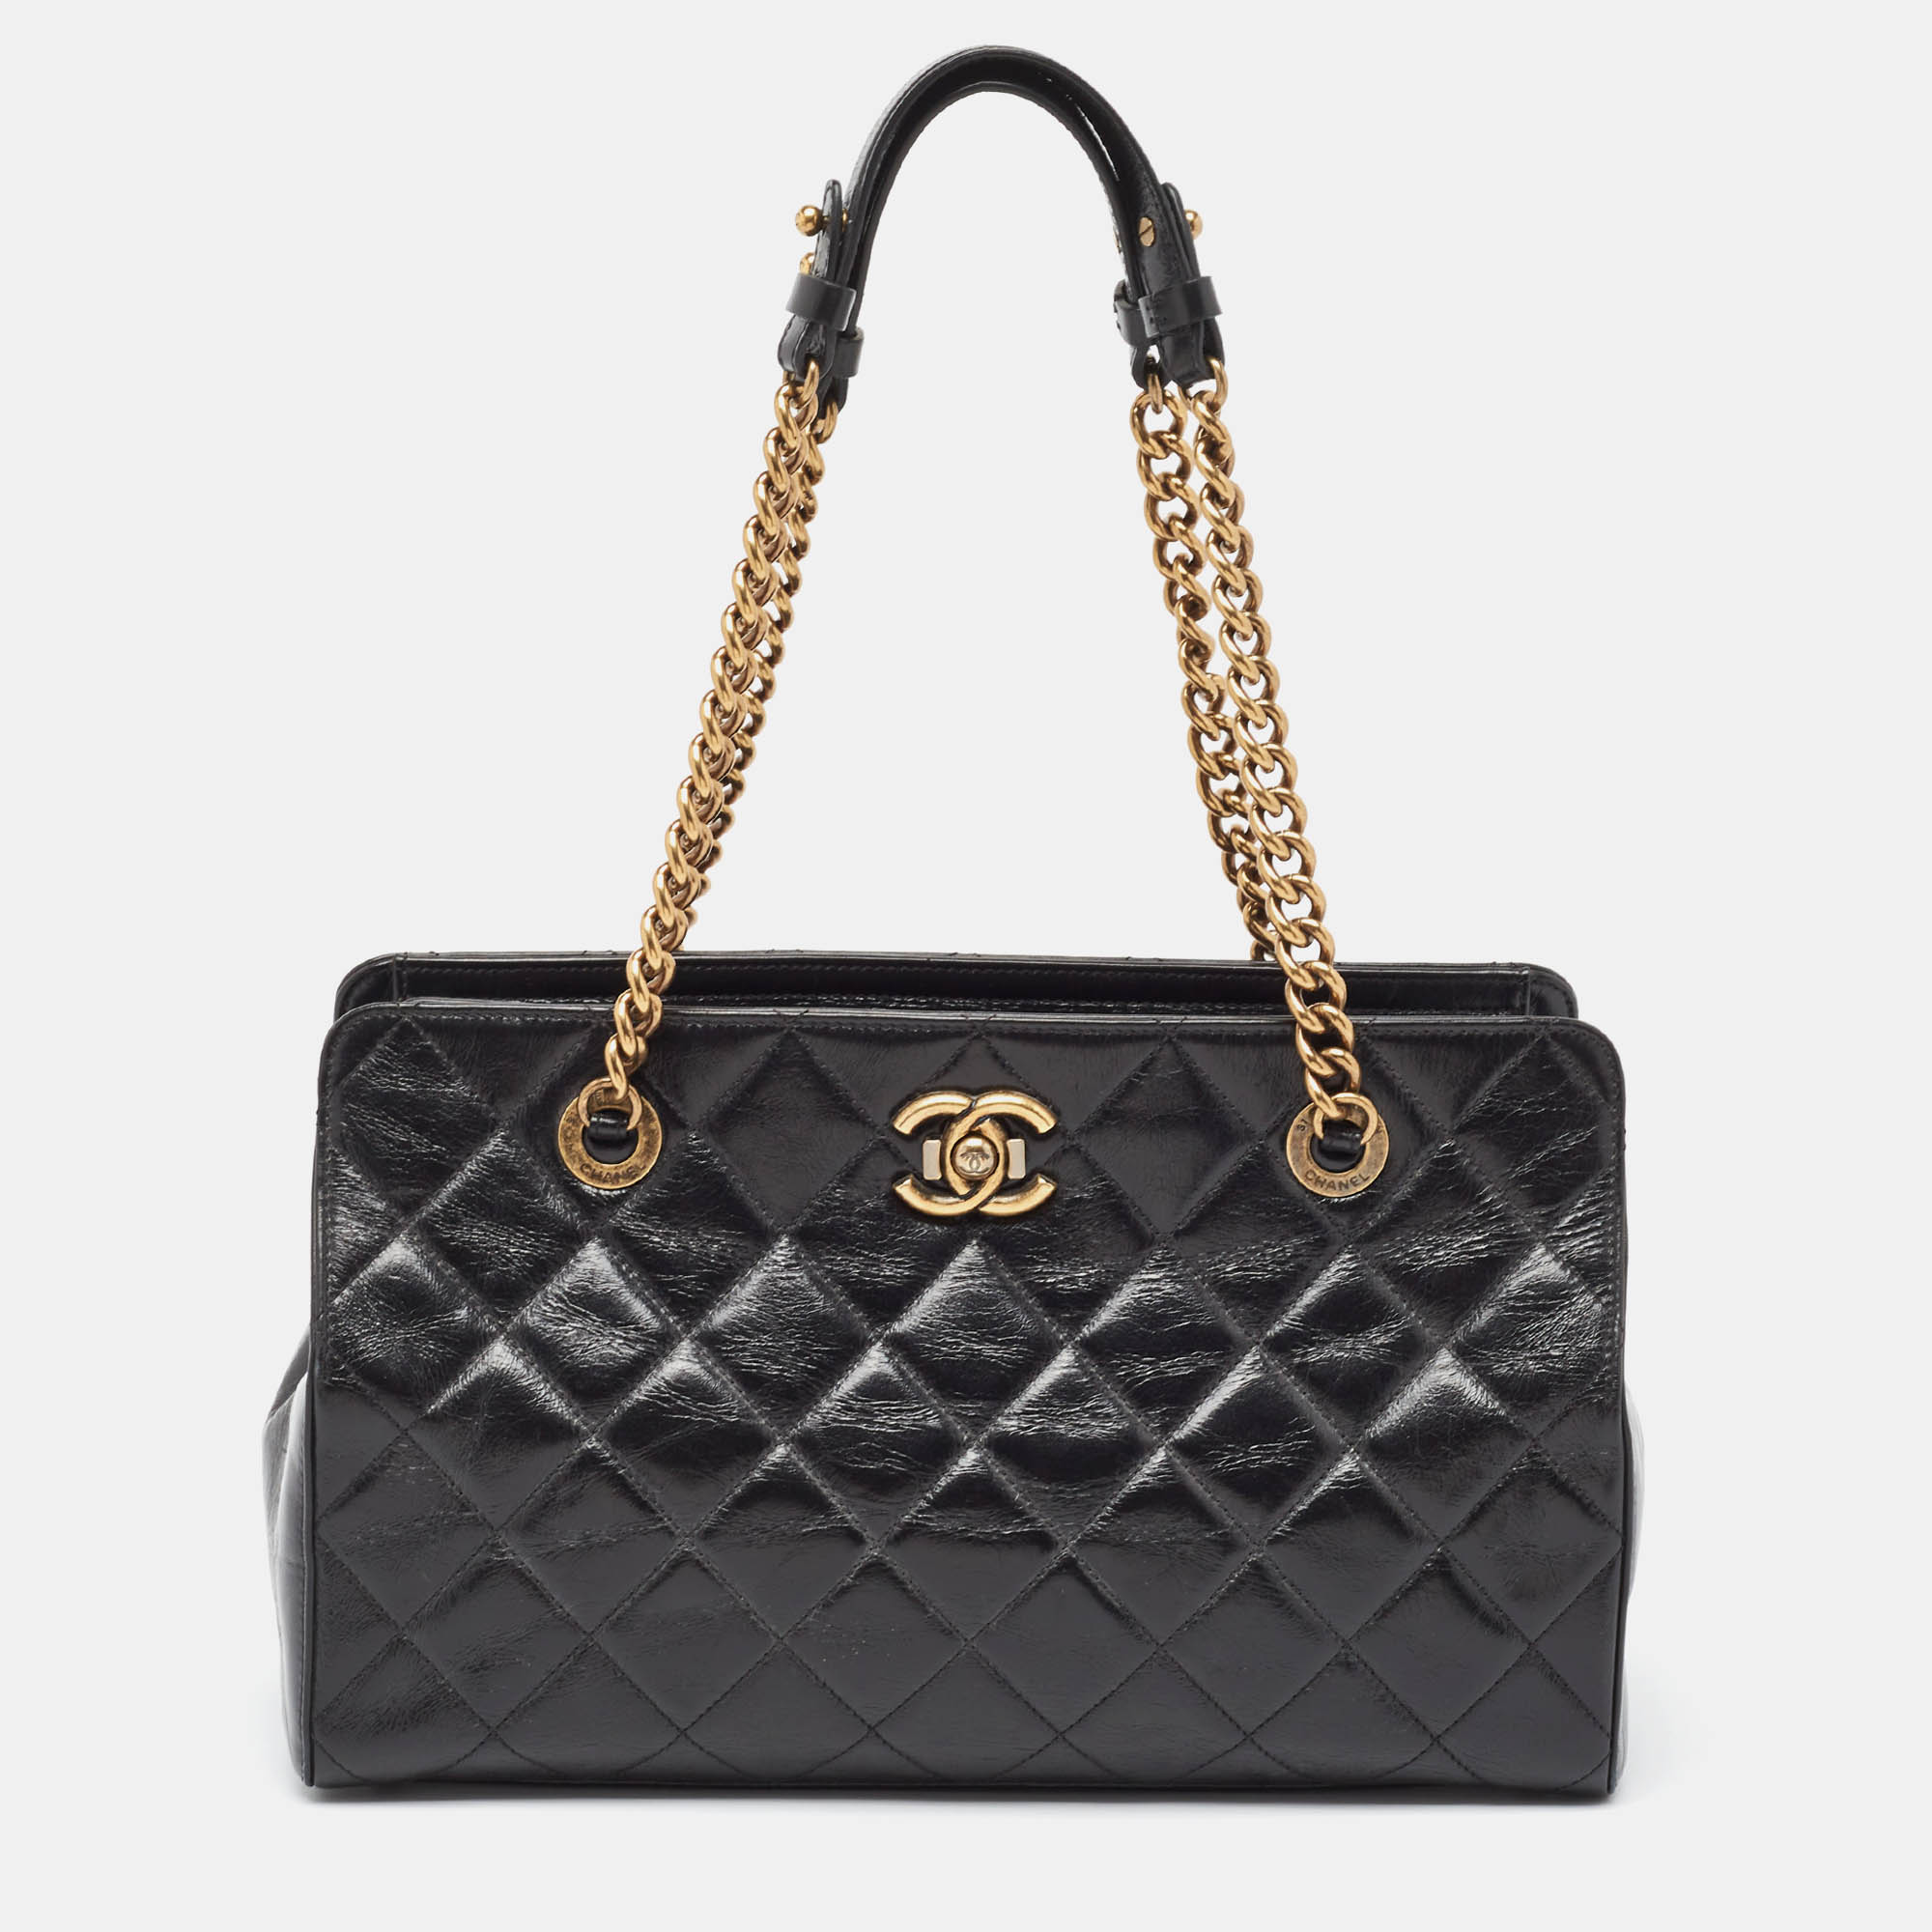 Chanel black quilted leather perfect edge tote